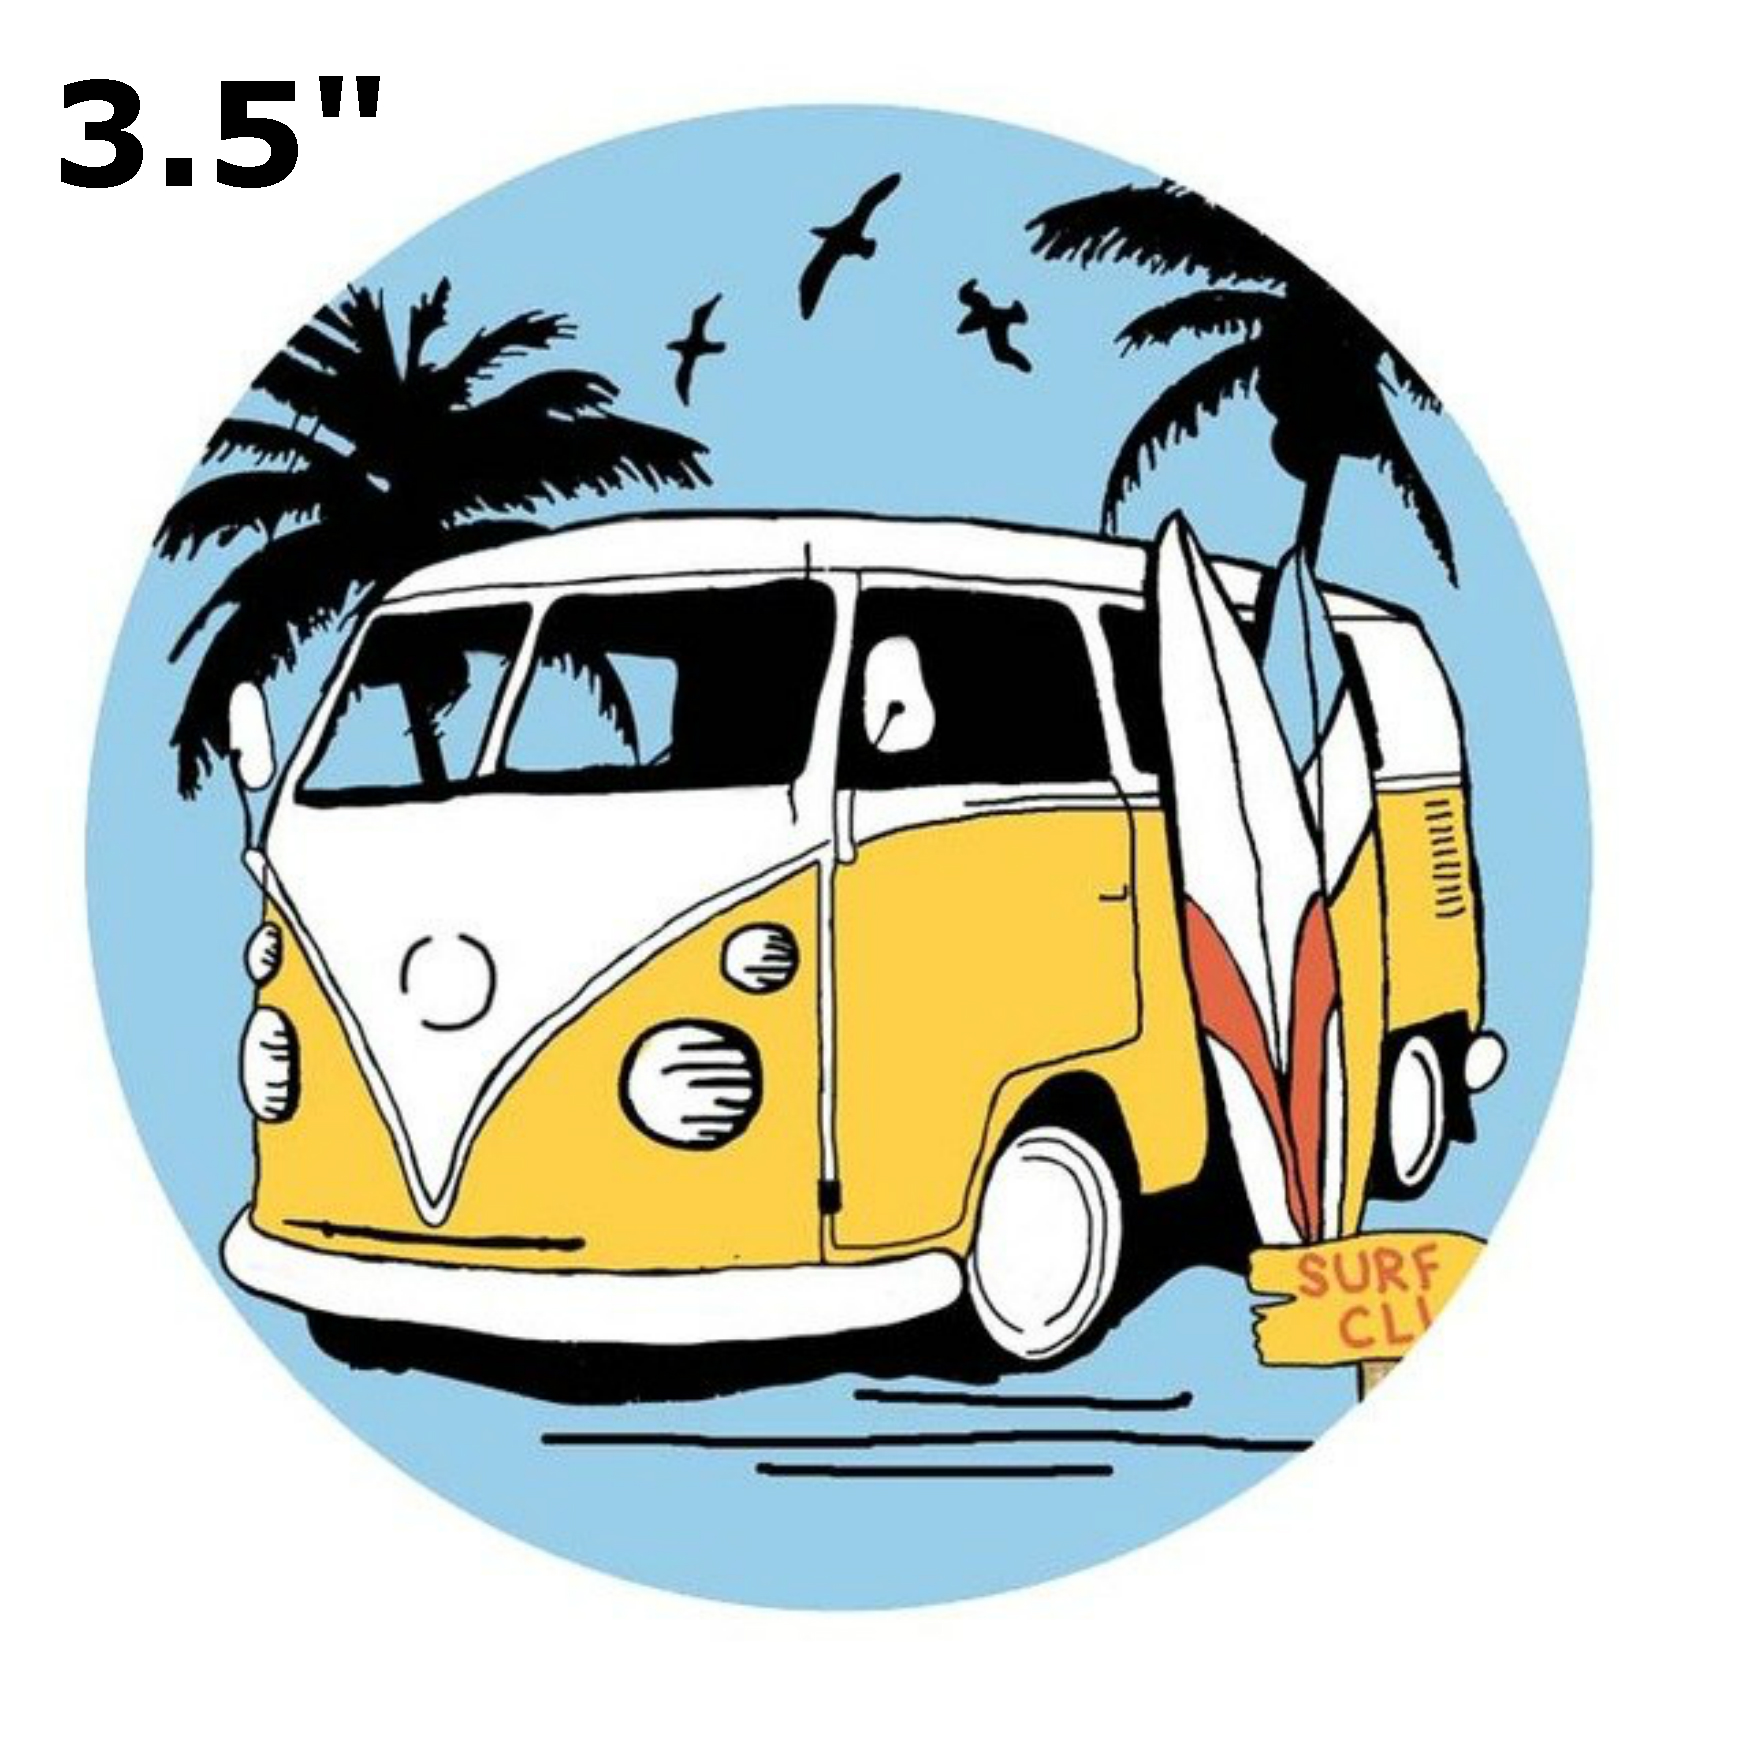 Superheroes Surfing Surfboard Van 3.5 inch Iron-On or Sew-On Embroidered Patch Novelty Applique - Surf Surfer 70's Hippie Woodstock Flower Child Peace